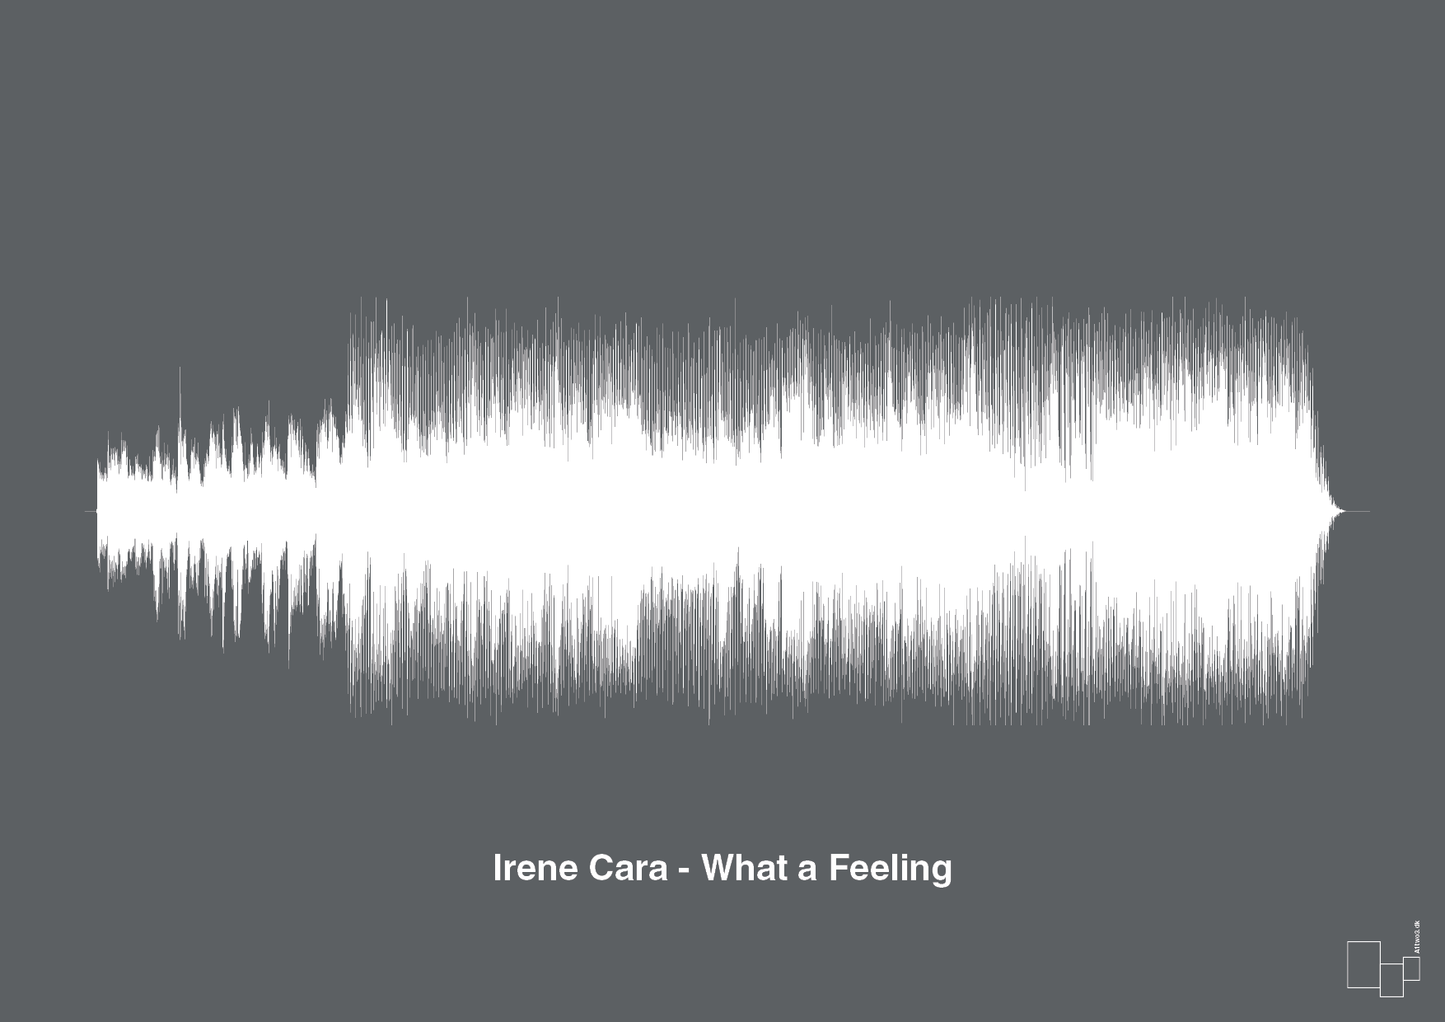 irene cara - what a feeling - Plakat med Musik i Graphic Charcoal